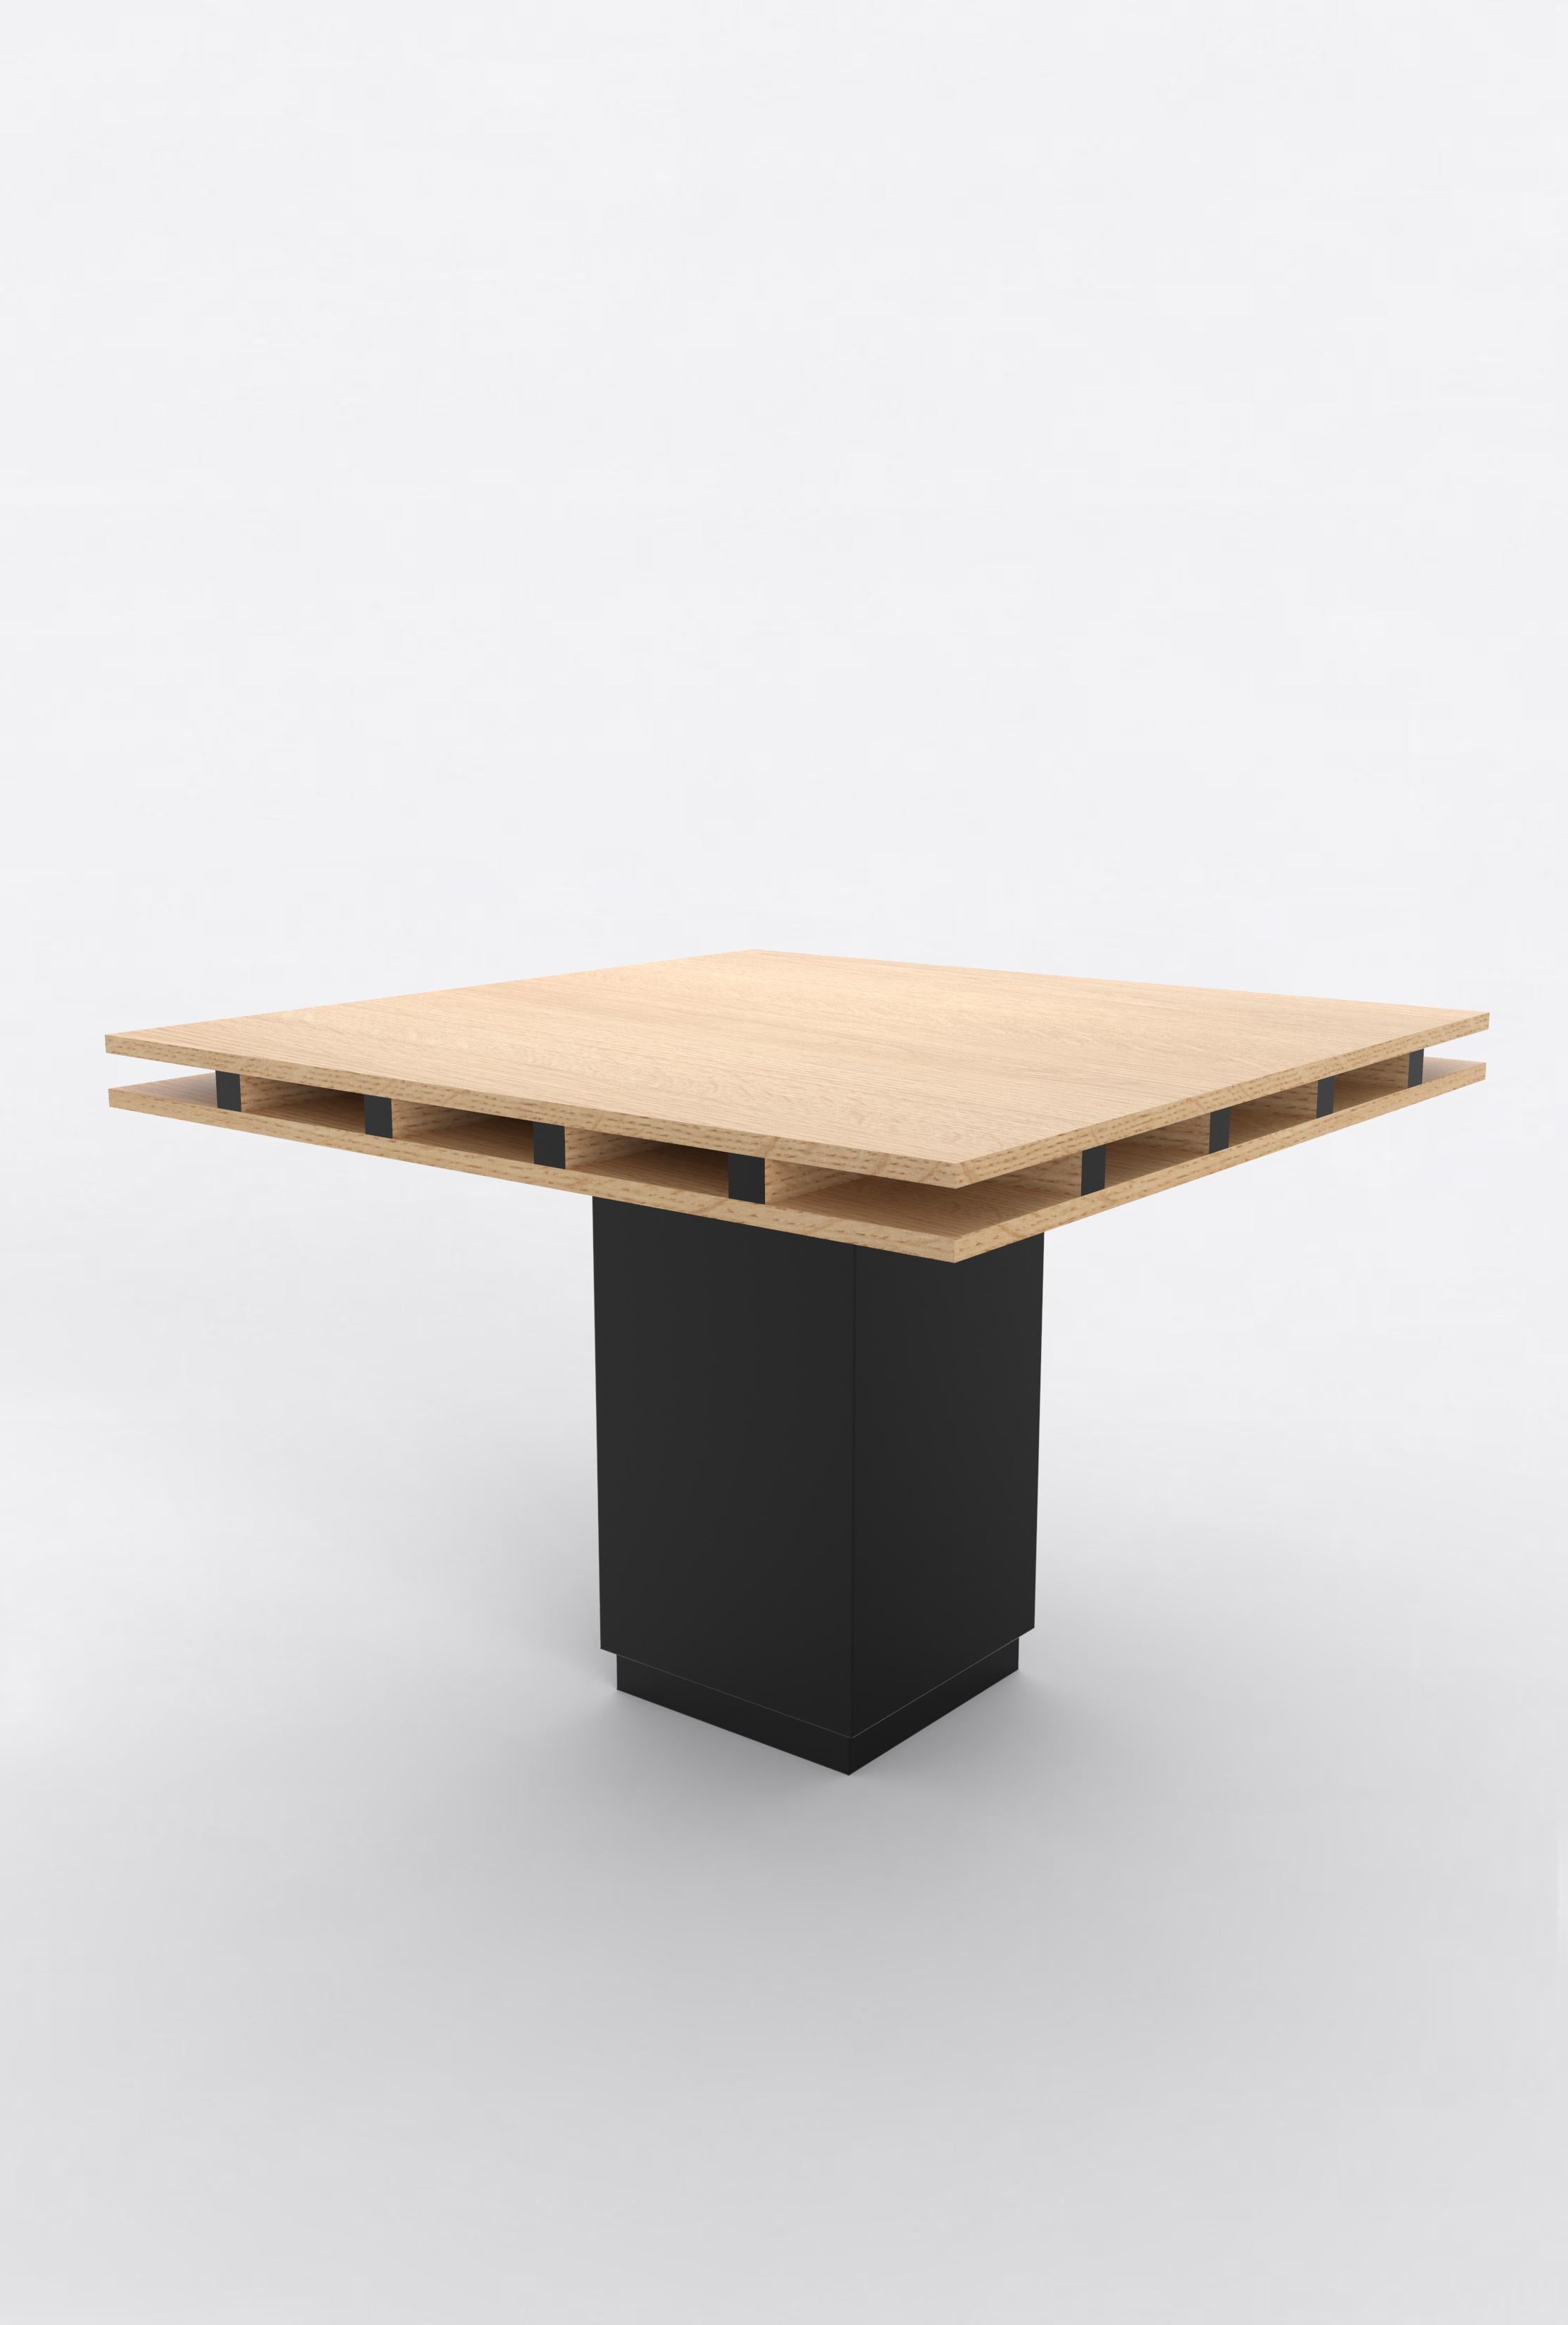 Post-Modern Contemporary 101 Dining Table in Oak and Black by Orphan Work For Sale